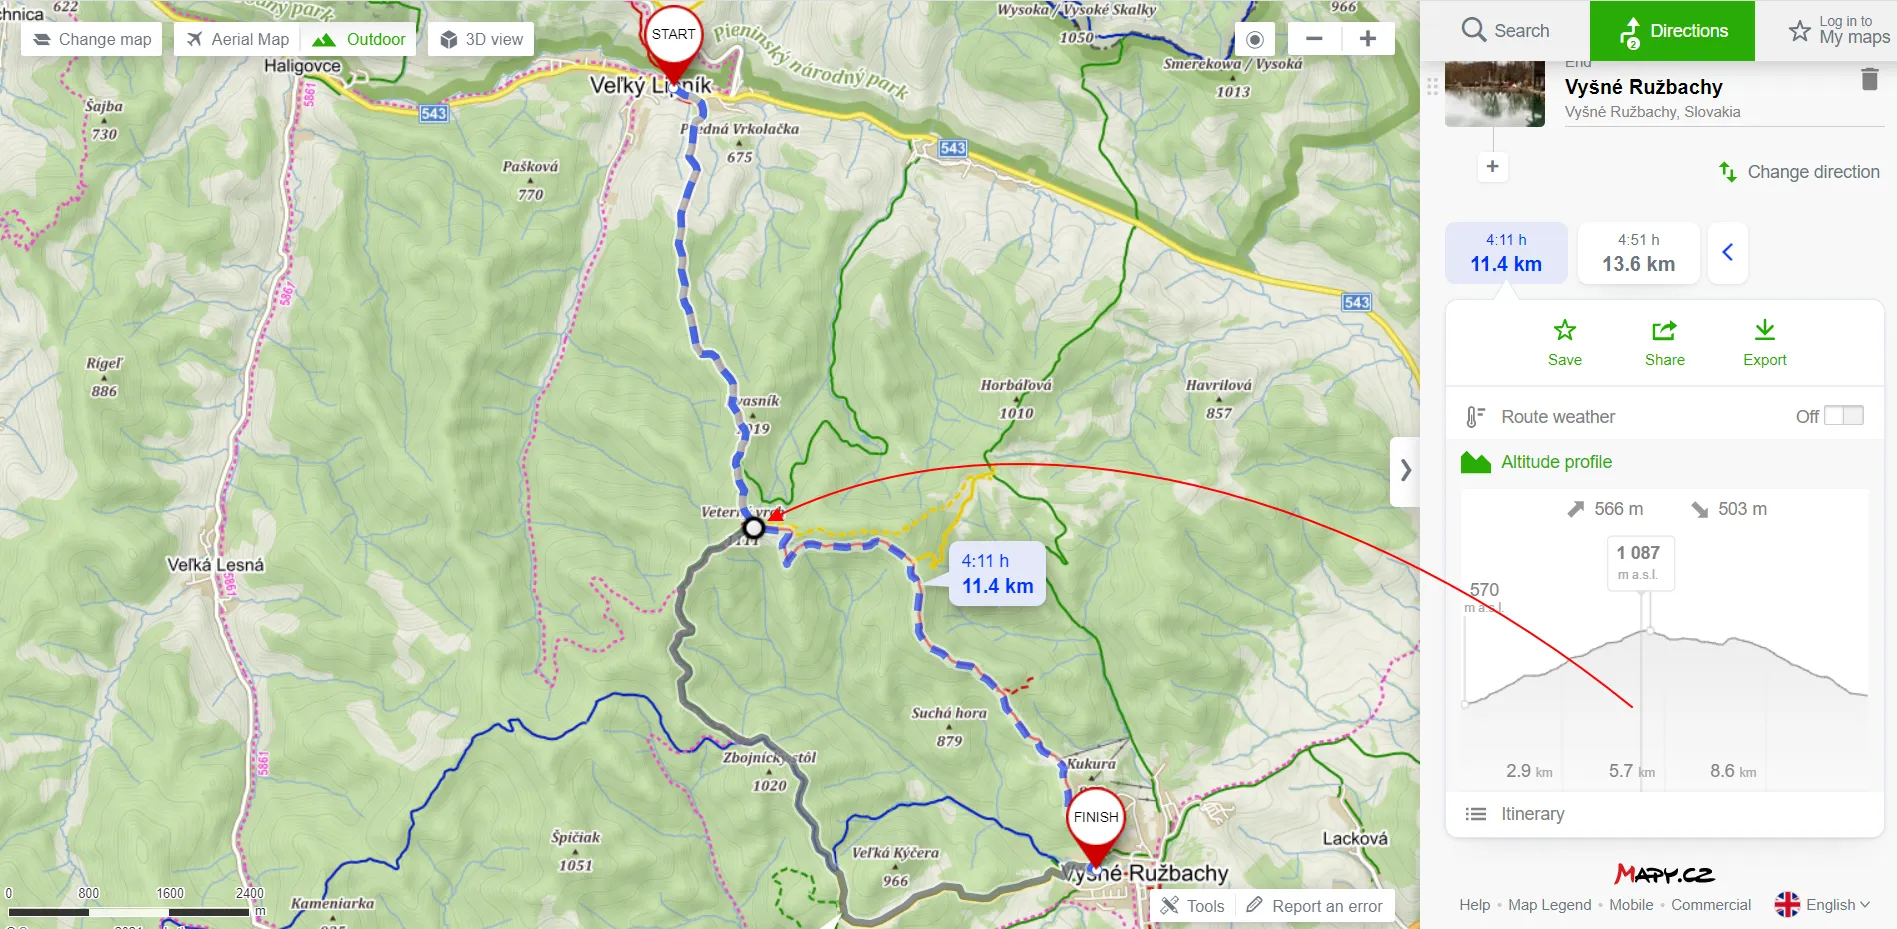 Mapy.cz terrain profile for walking route